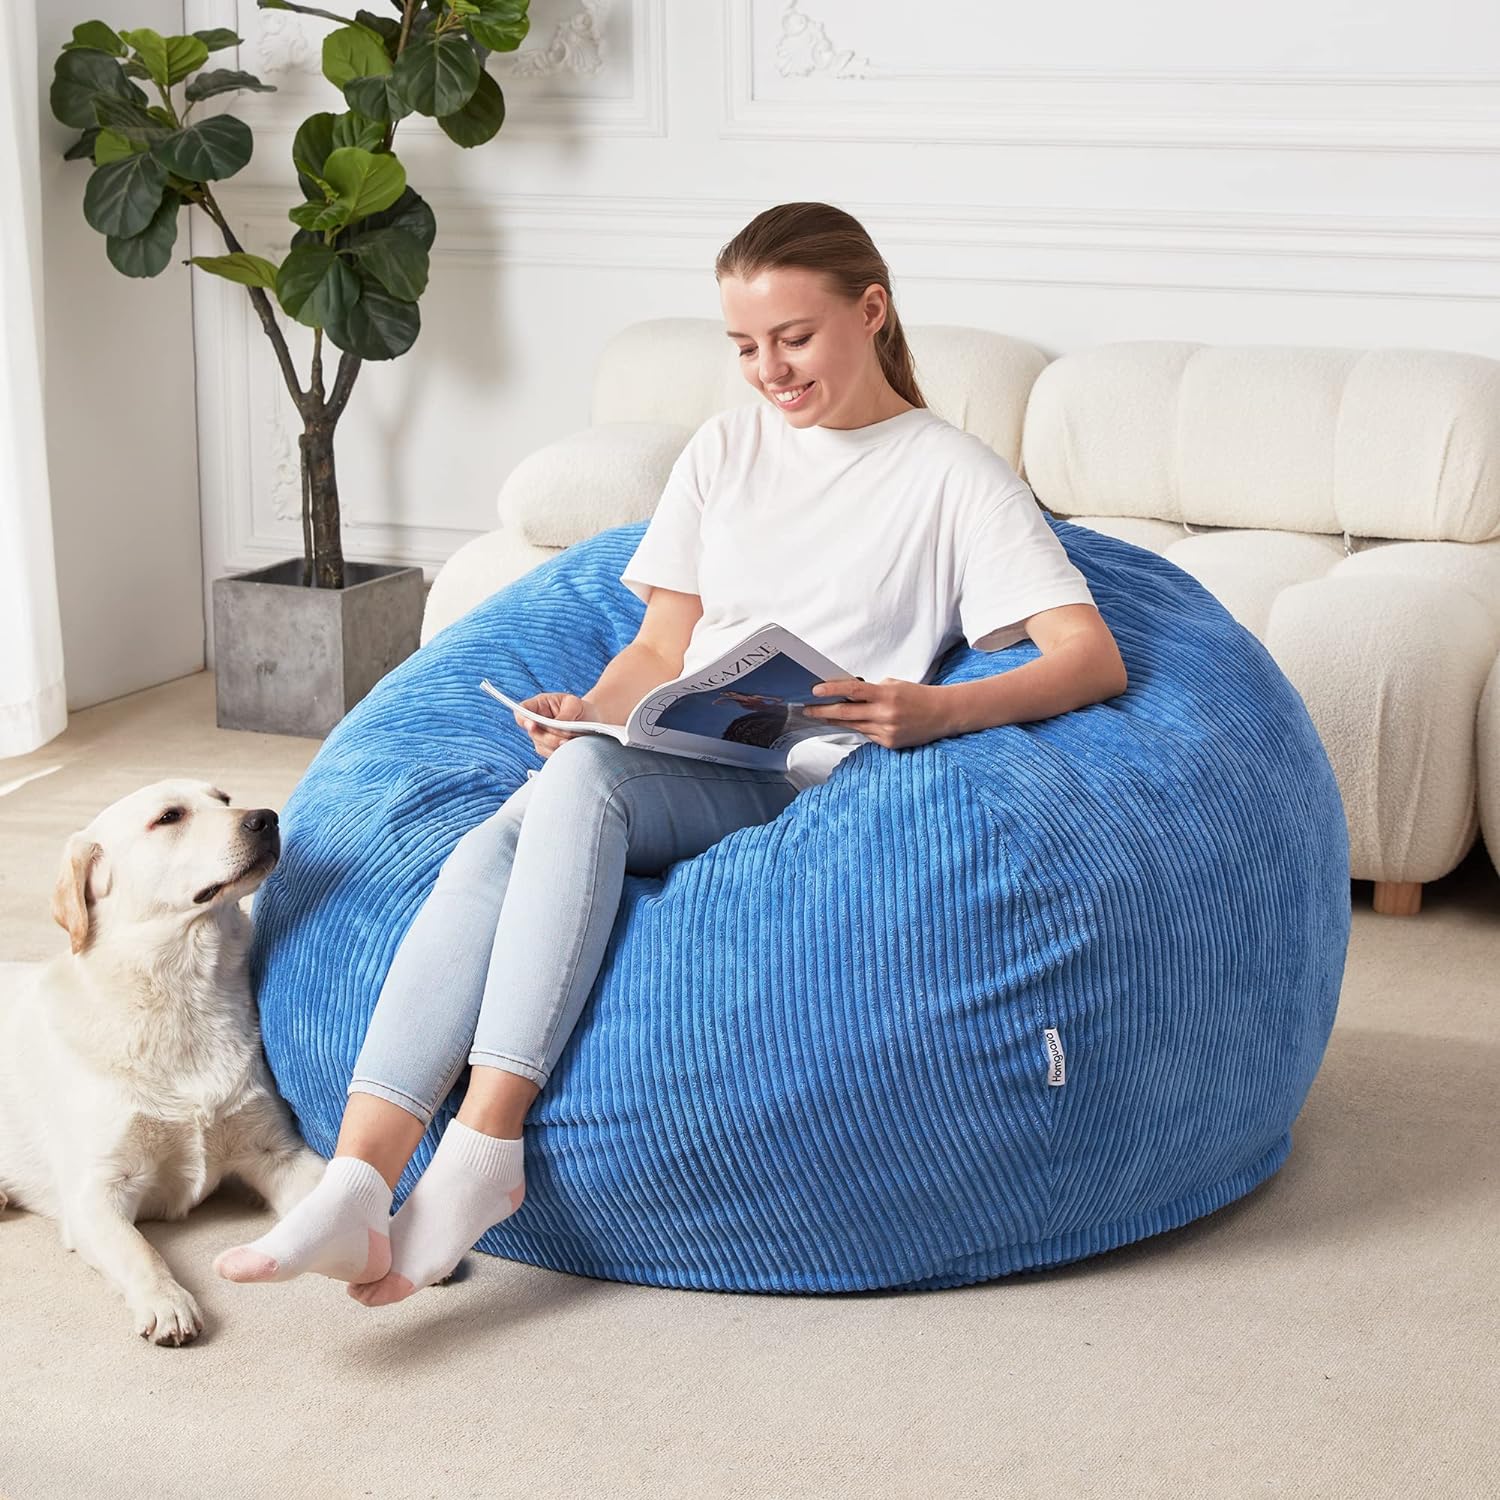 Homguava Bean Bag Chair: Teardrop Bean Bags with Memory Foam Filled, Compact Beanbag Chairs Soft Sofa with Corduroy Cover (Blue)